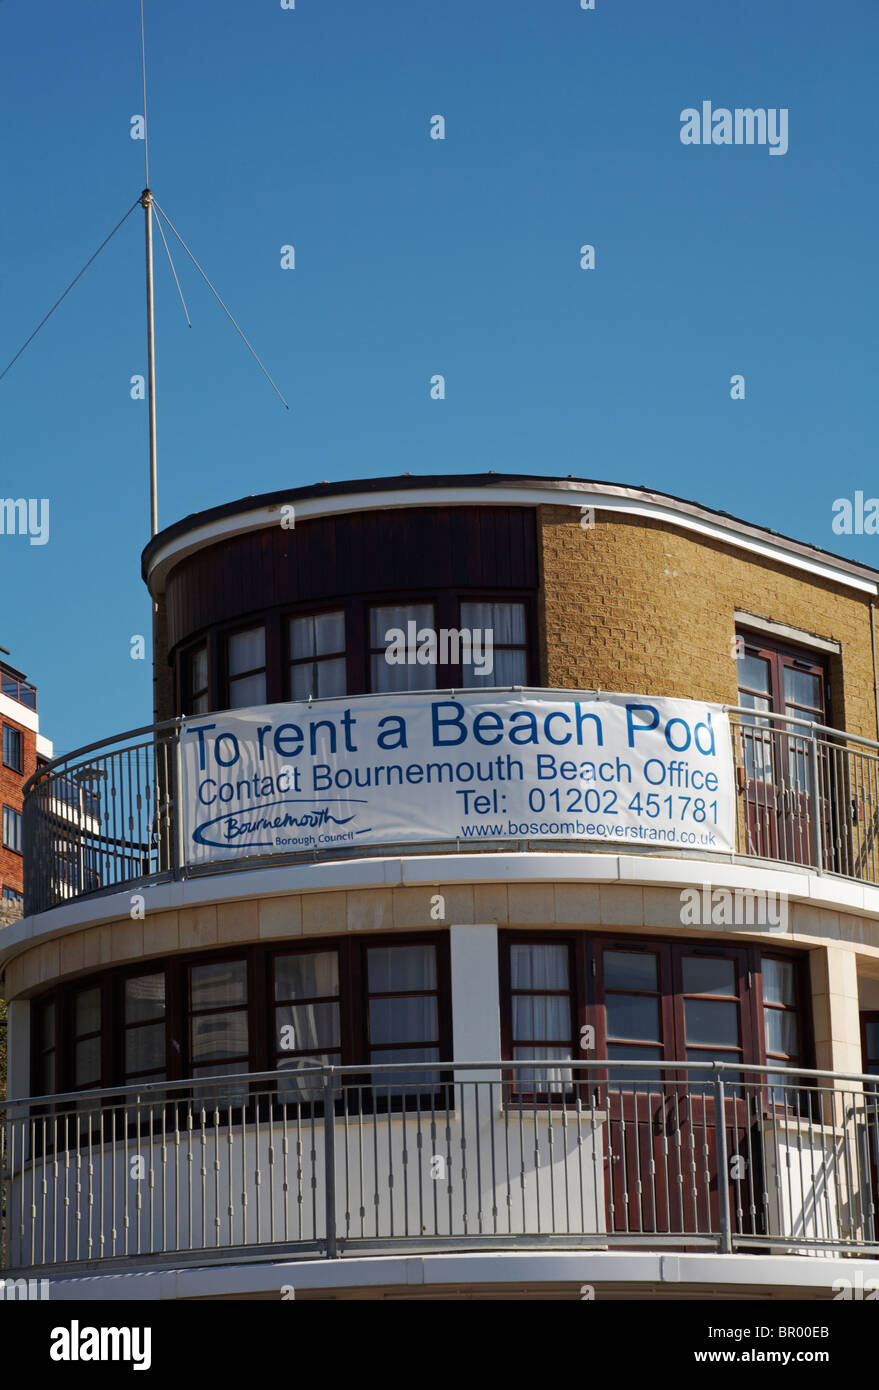 Beach pods for rent at Boscombe Overstrand, Bournemouth Stock Photo